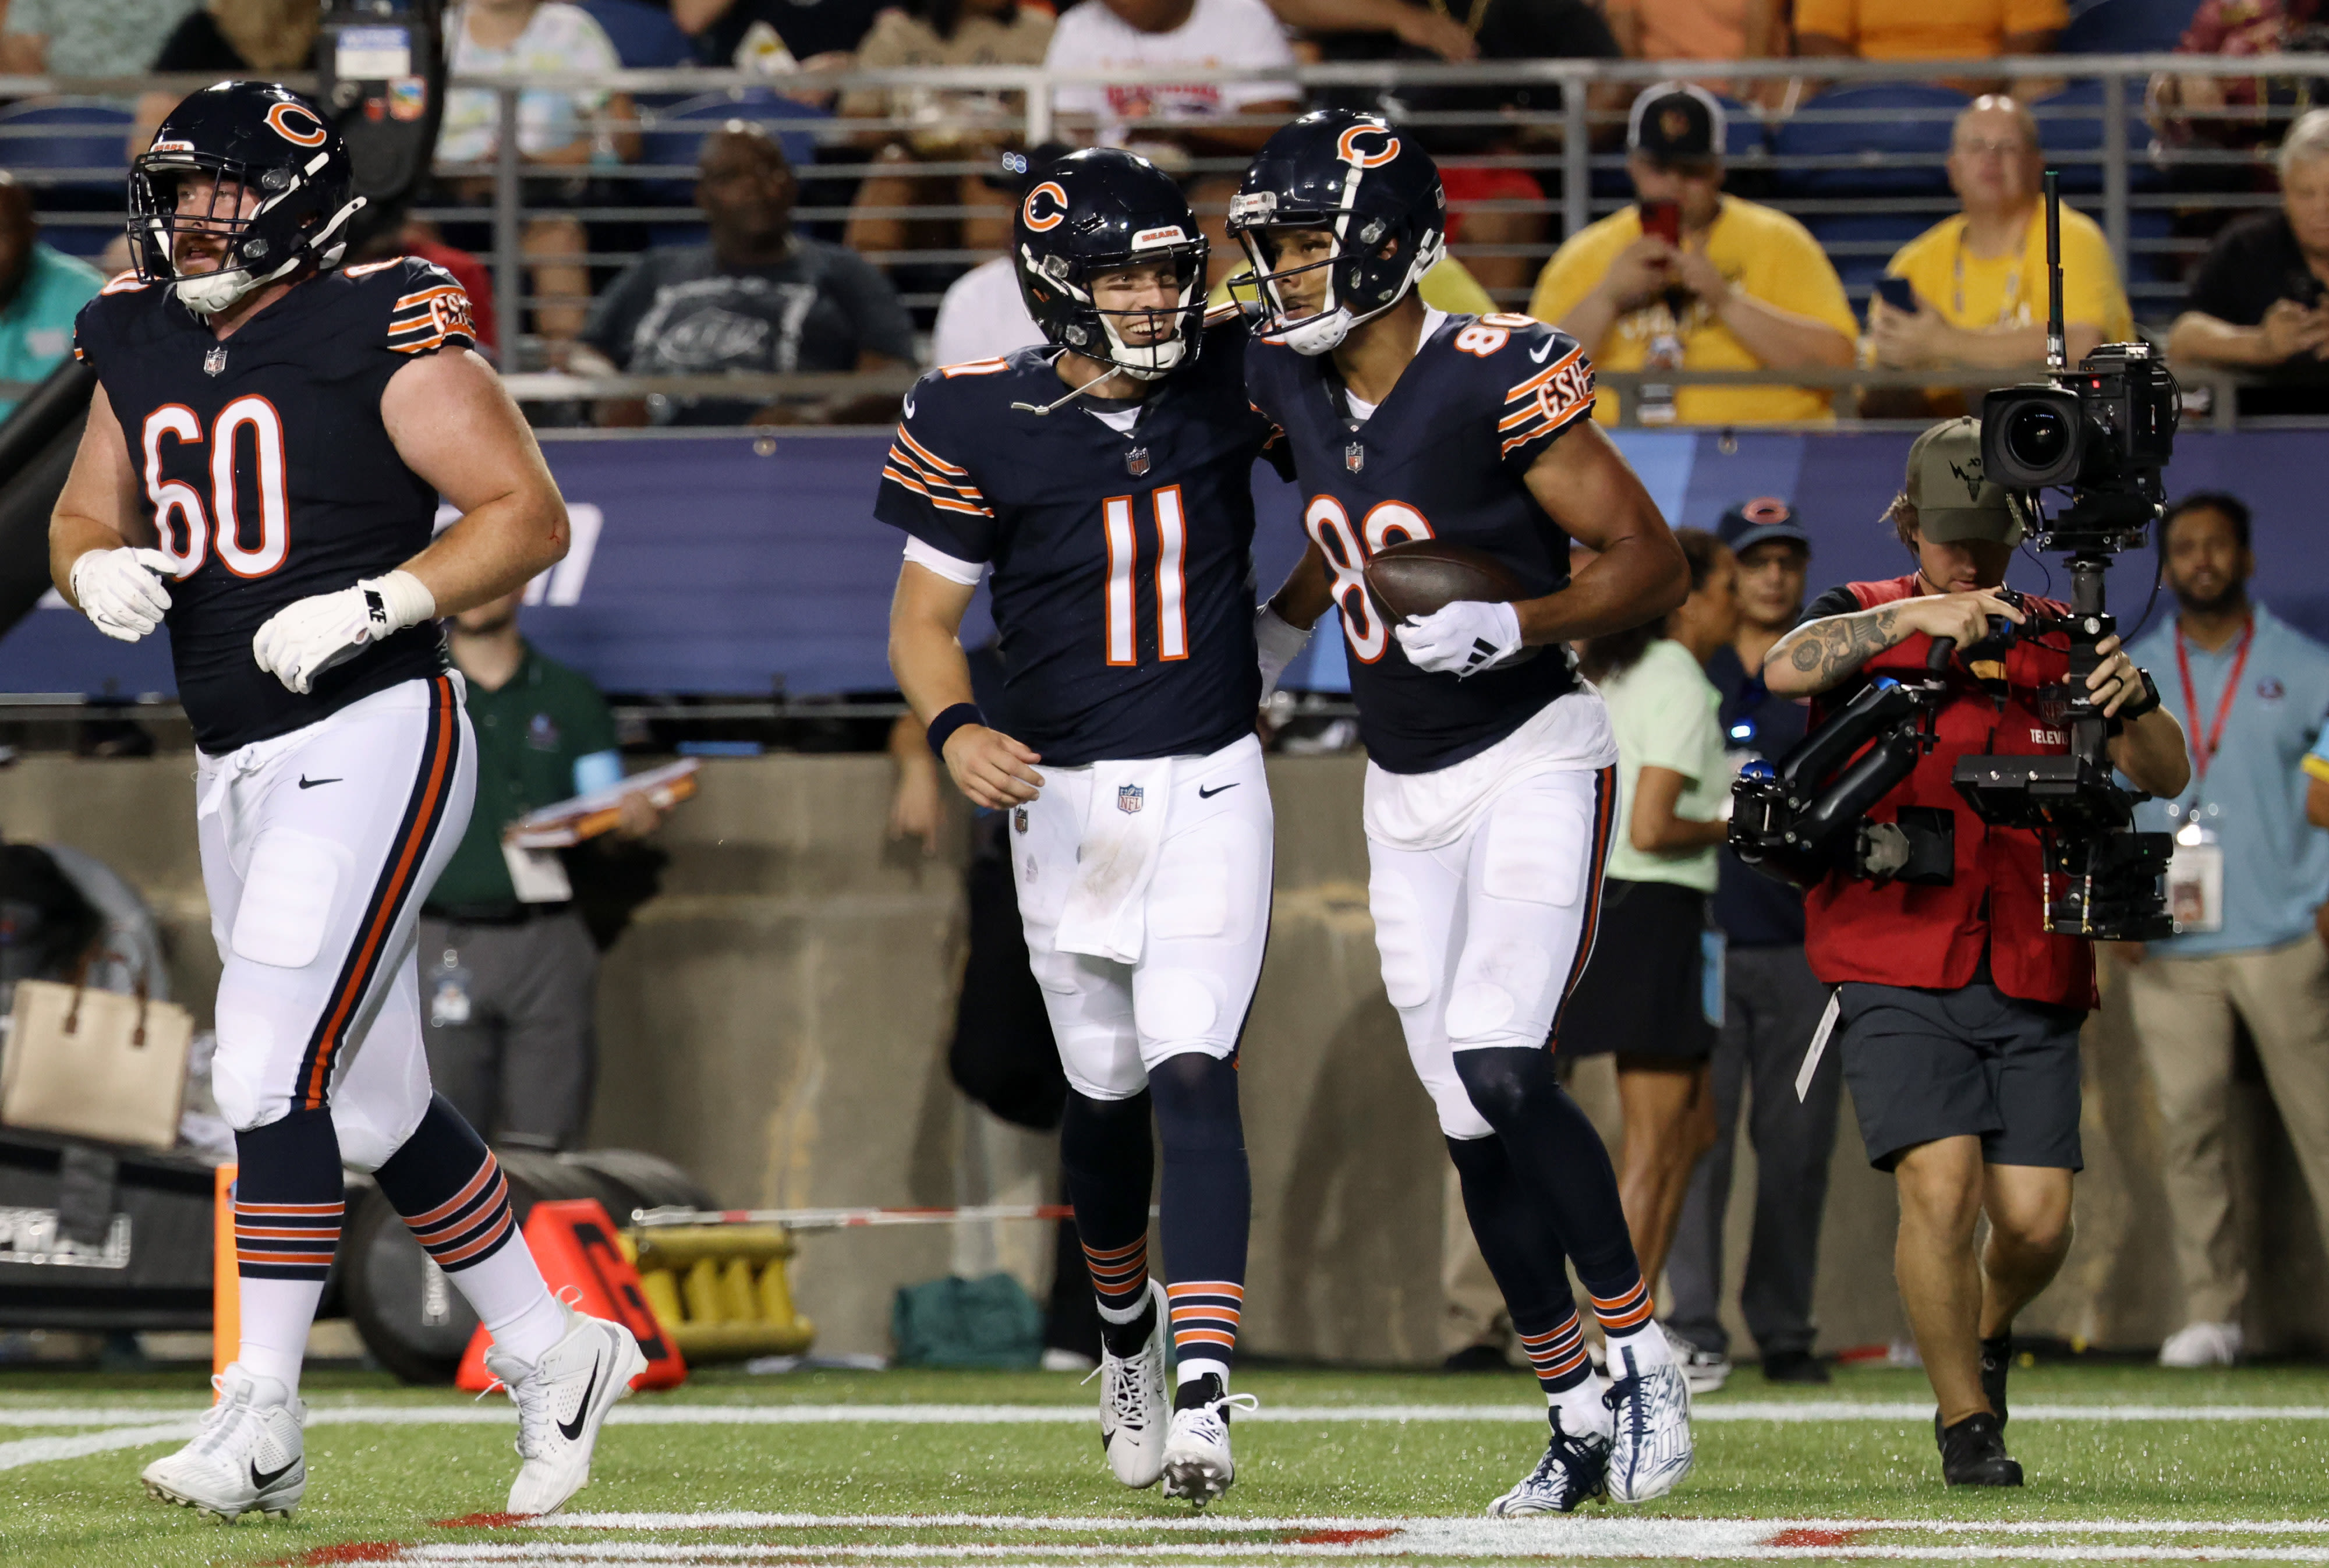 Chicago Bears open the preseason with a storm-shortened 21-17 win against the Houston Texans in the Pro Football Hall of Fame Game